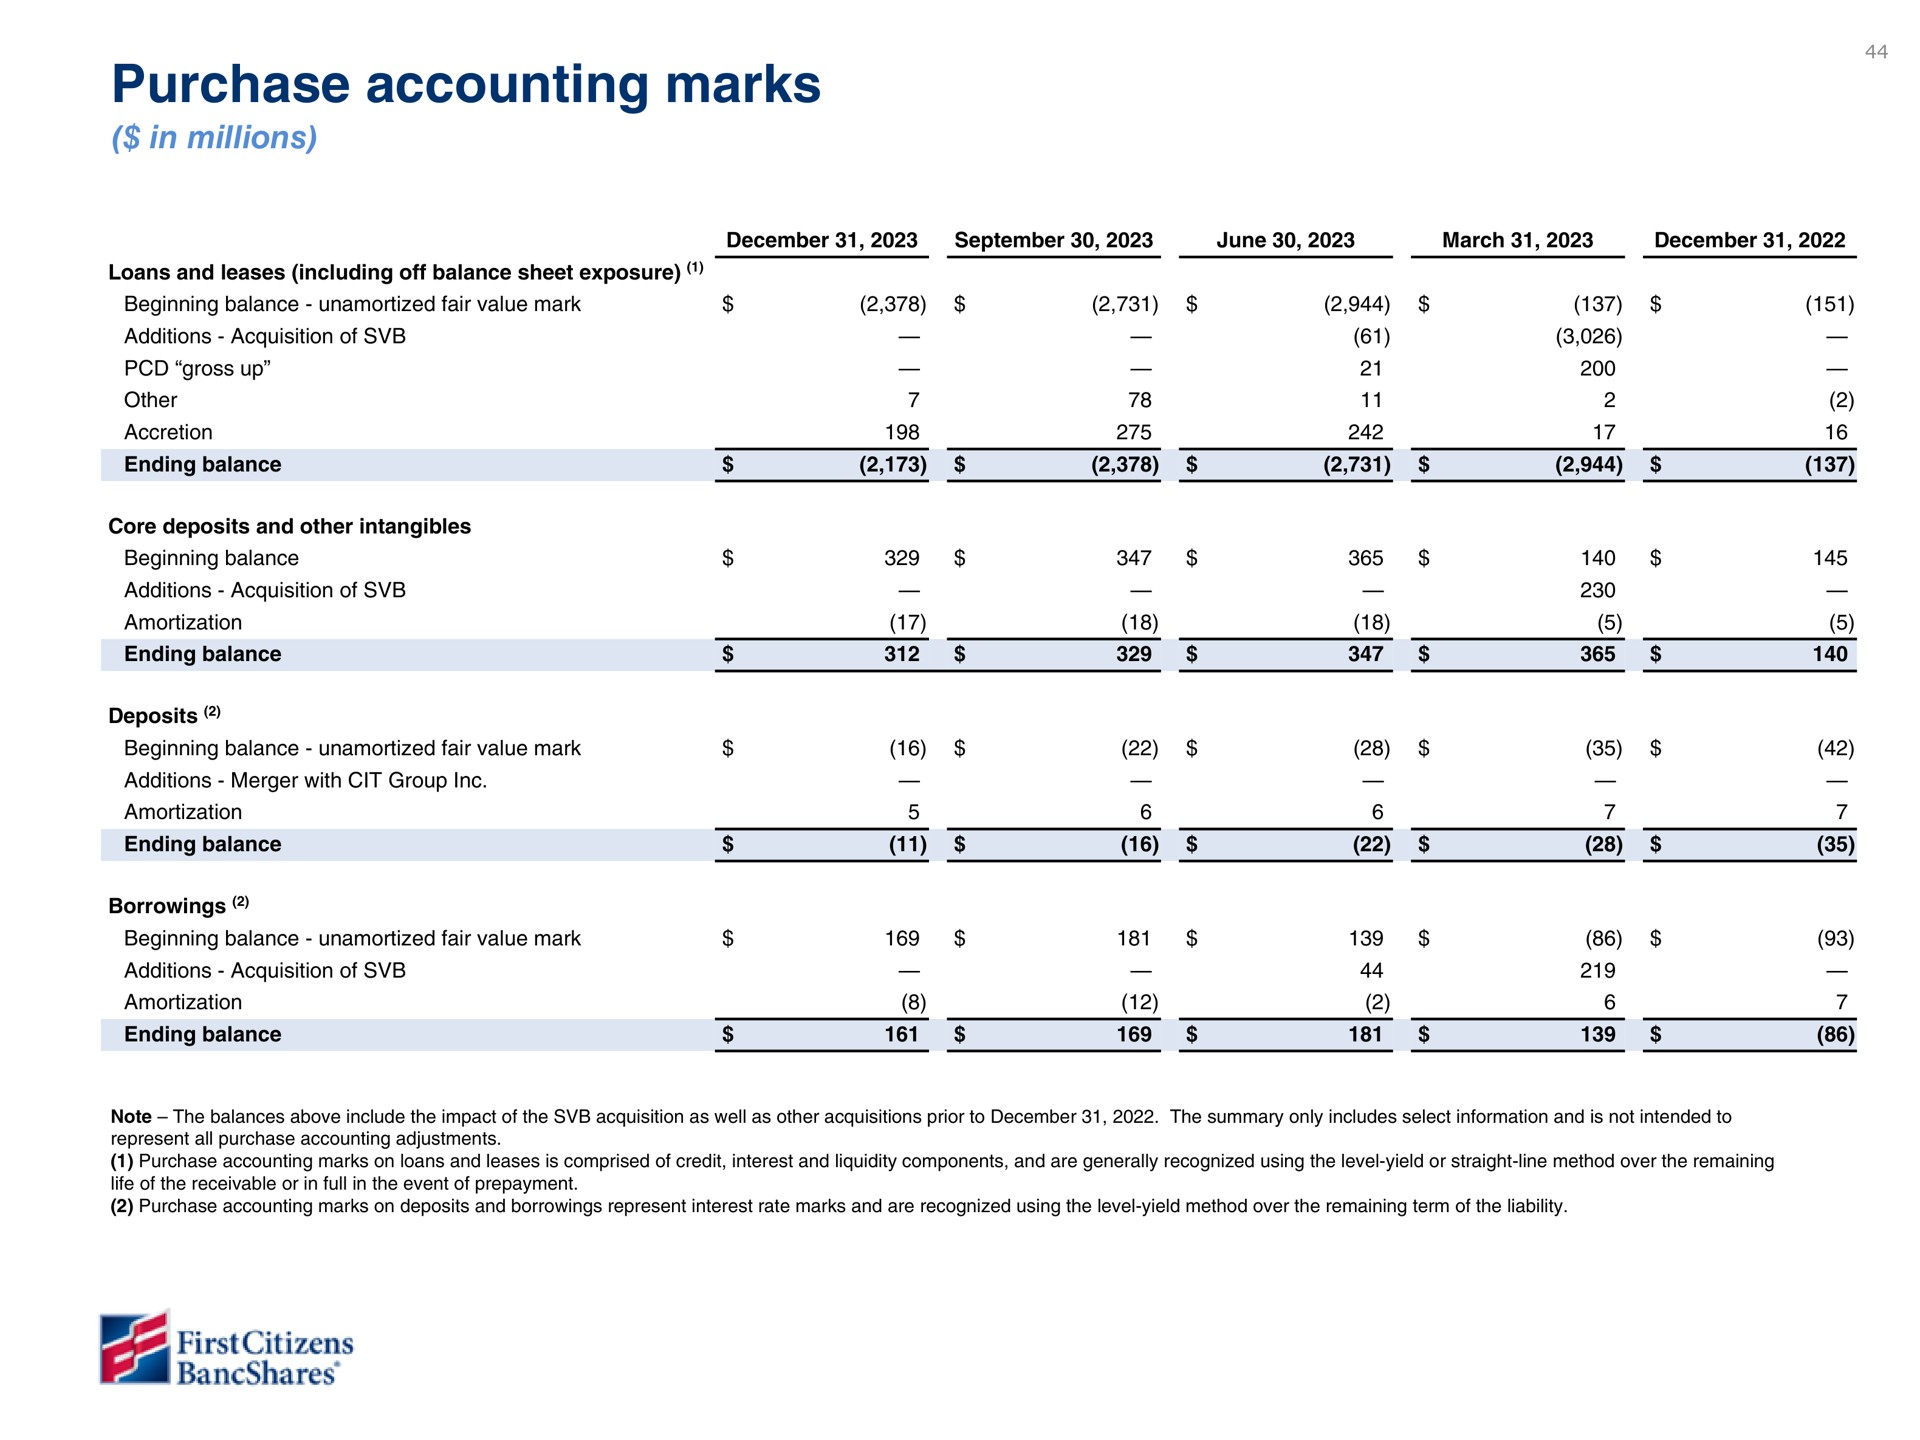 purchase accounting marks | First Citizens BancShares